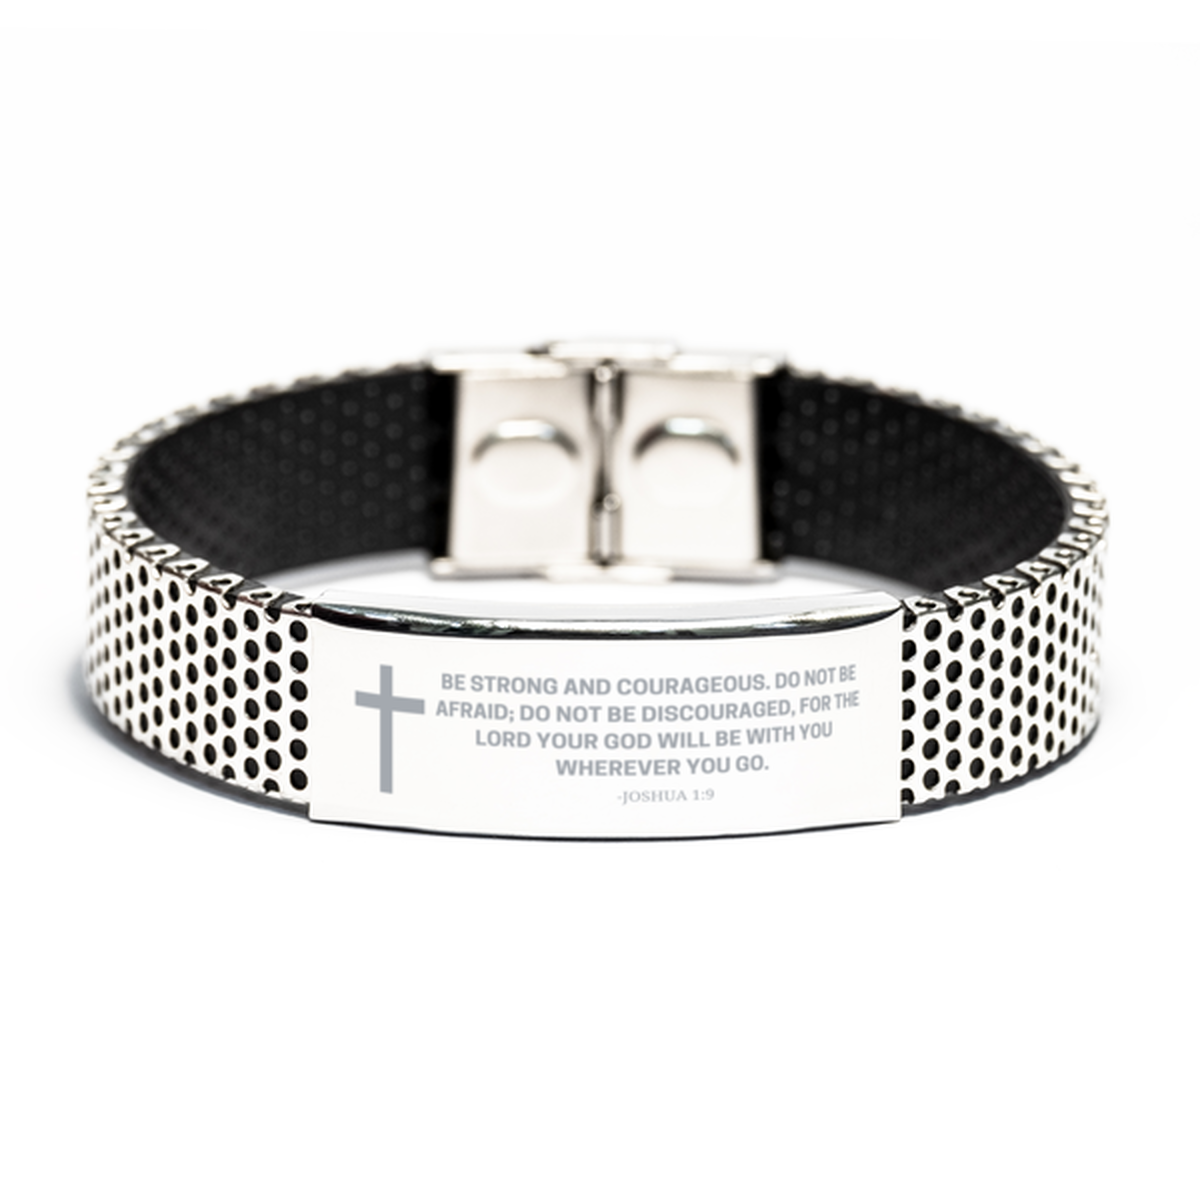 Baptism Gifts For Teenage Boys Girls, Christian Bible Verse Stainless Steel Bracelet, For the lord your God will be with you, Catholic Confirmation Gifts for Son, Godson, Grandson, Nephew